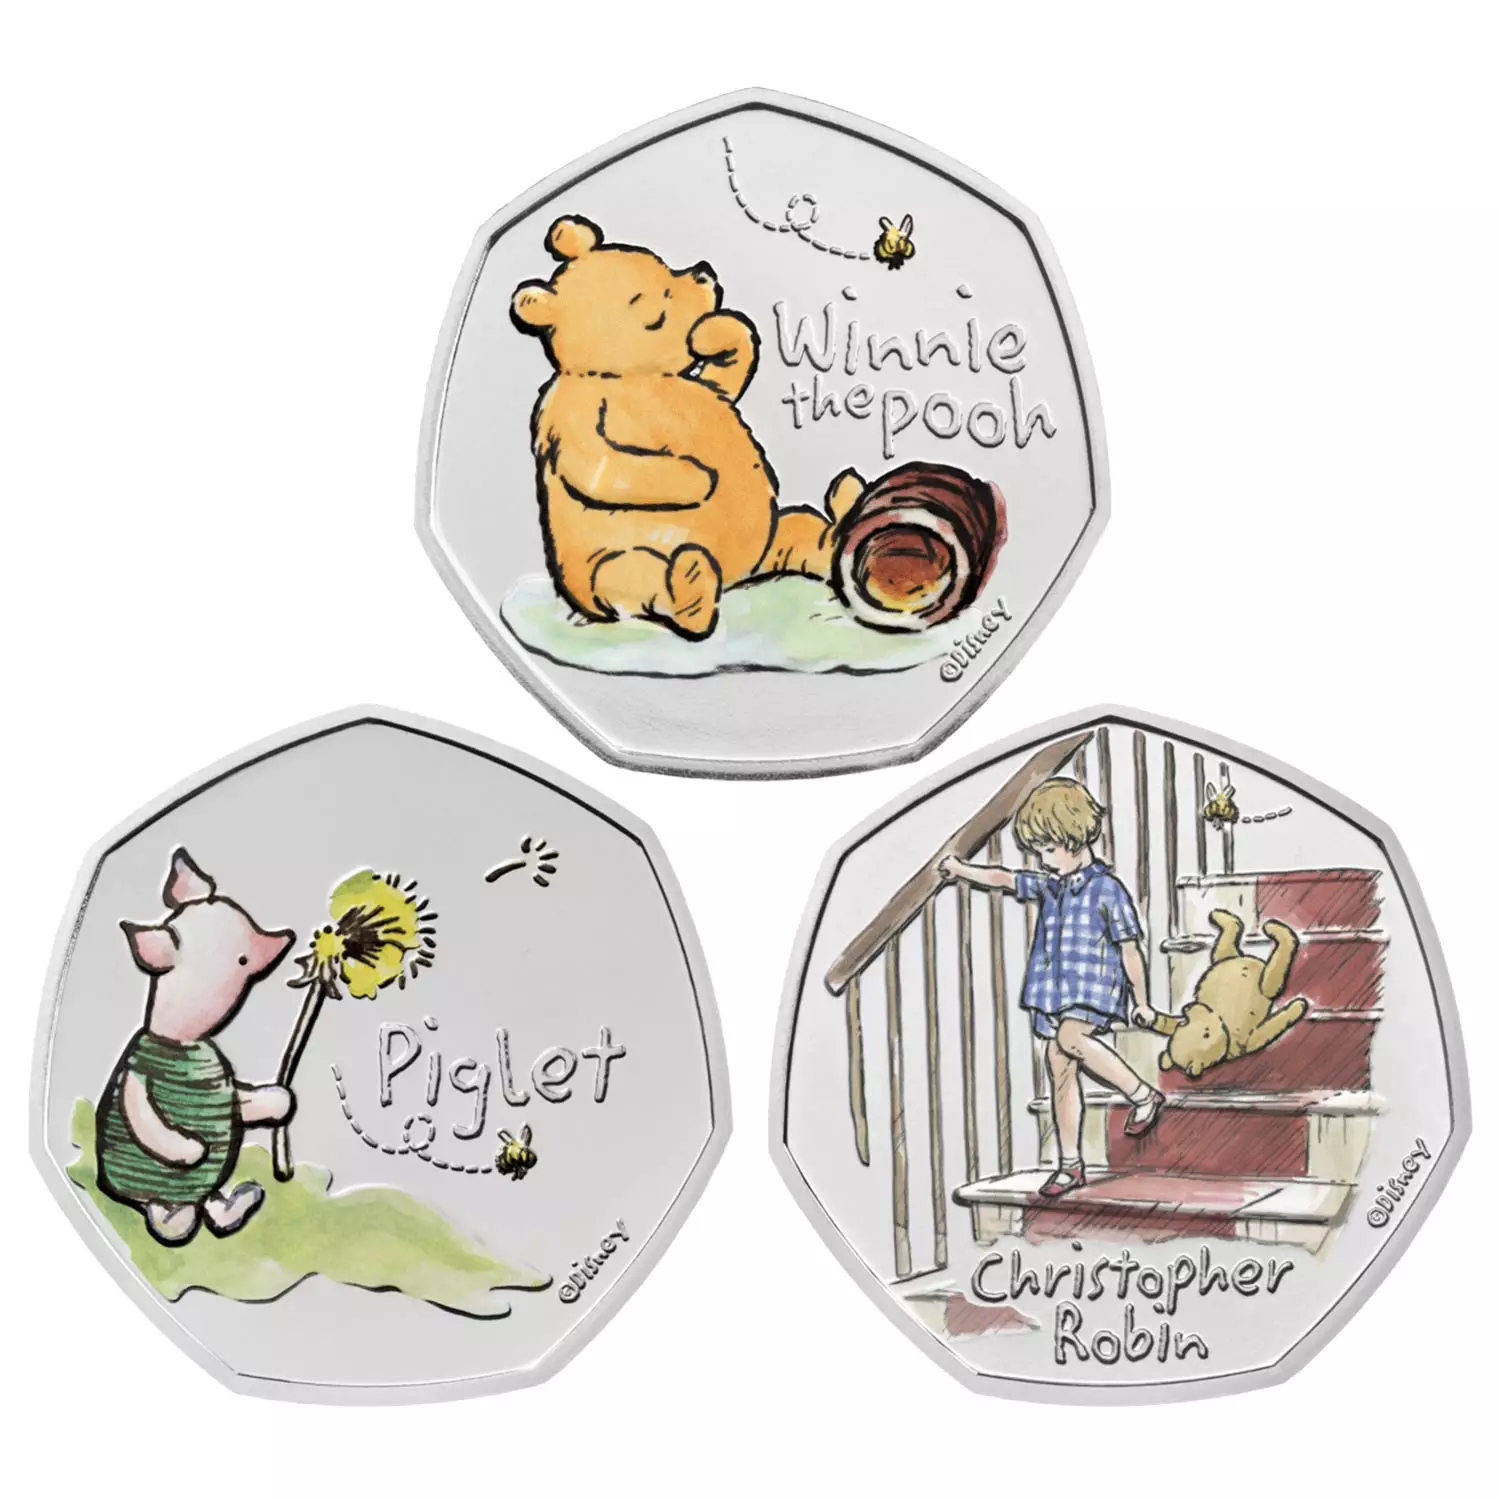 The coin is the first in an adorable collection (